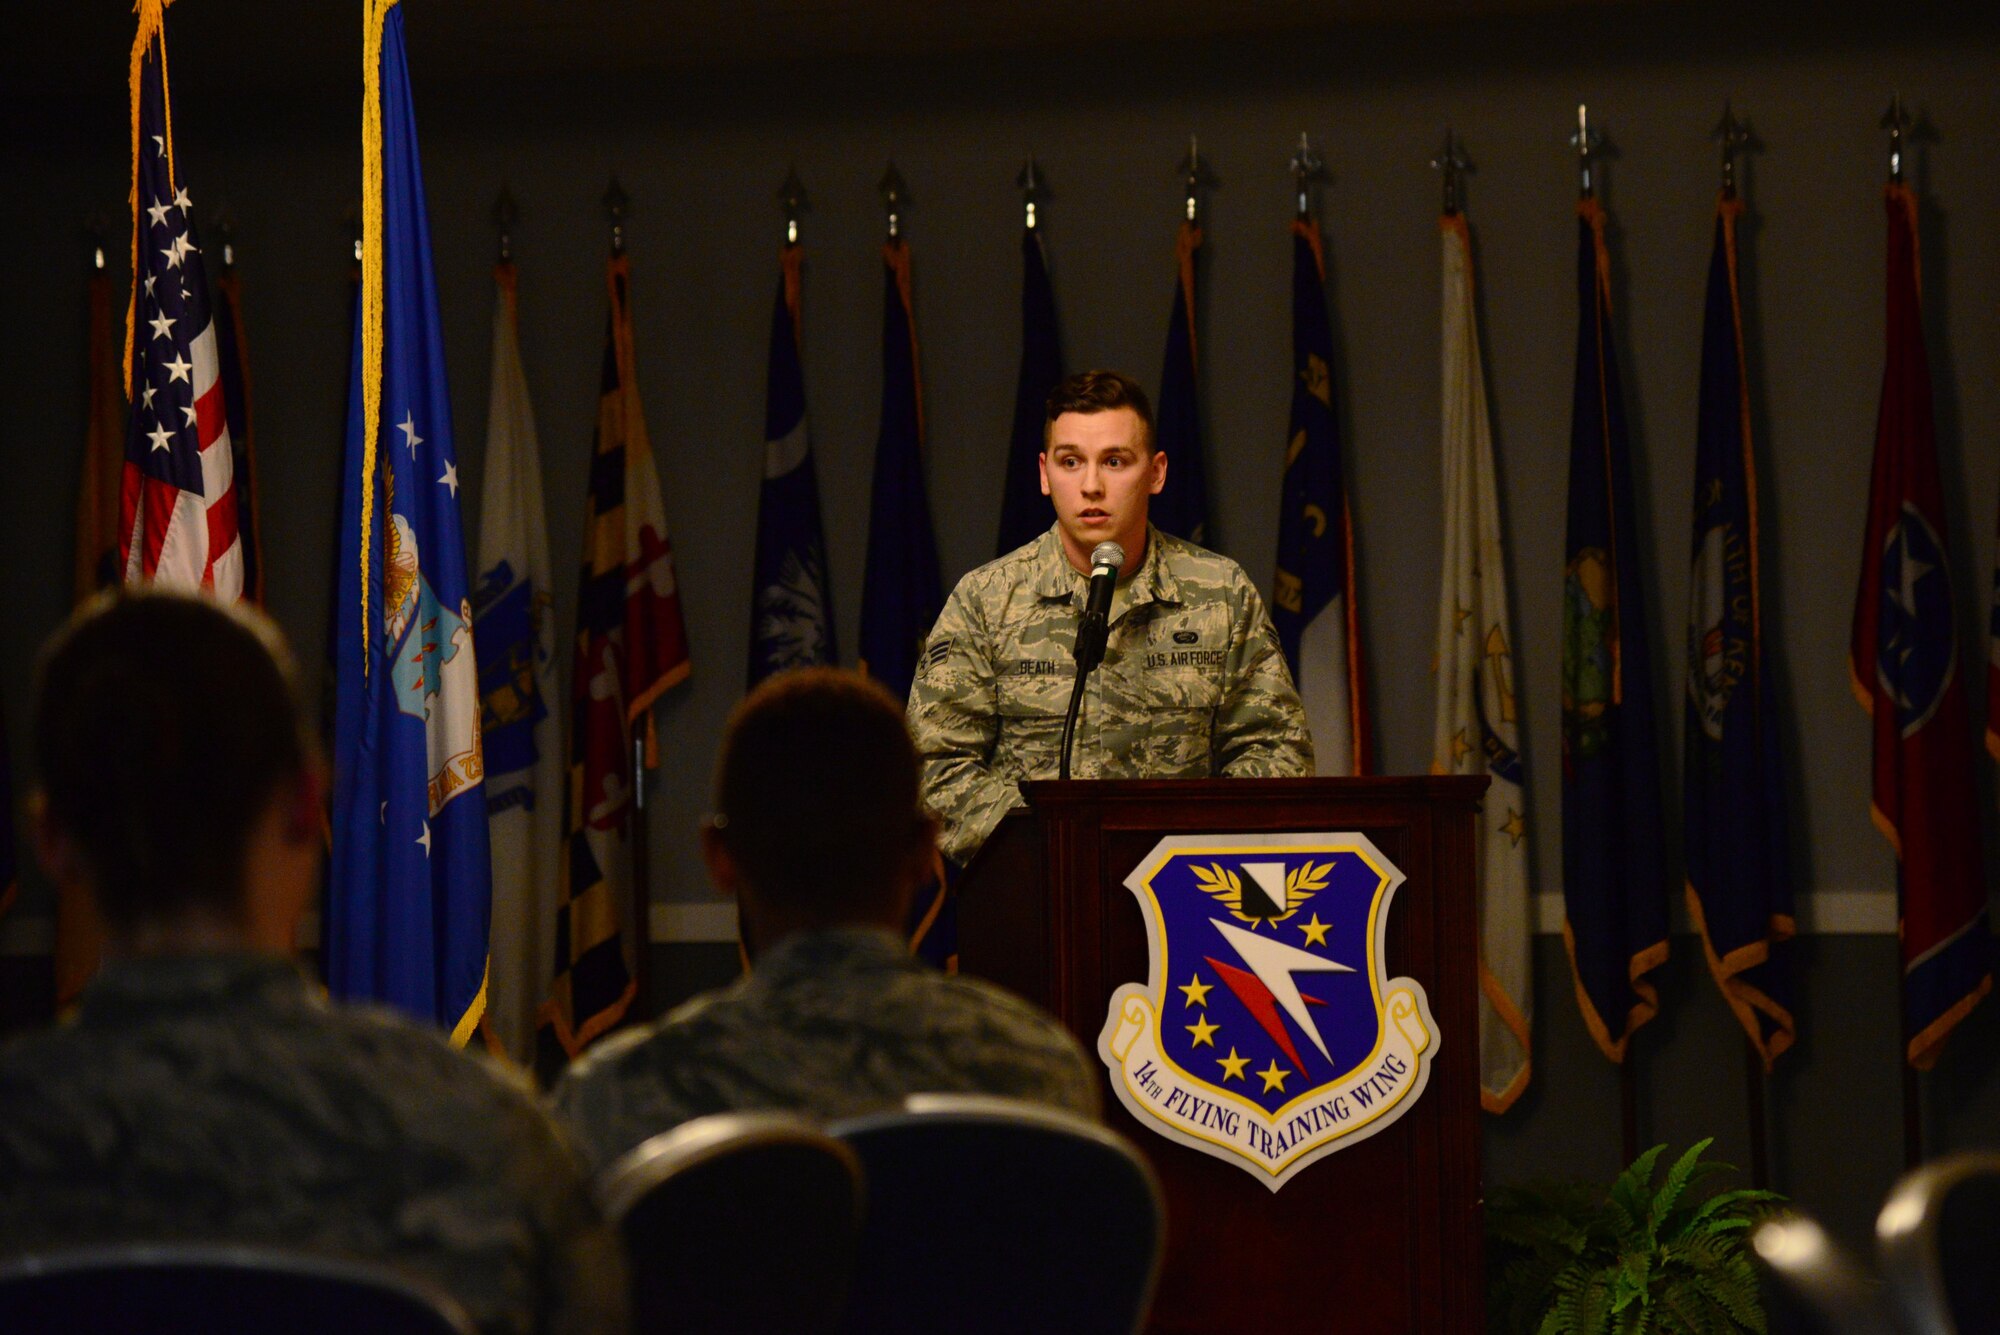 Senior Airman Kyle Beath, 14th Force Support Squadron Force Management journeyman, tells his story during Storytellers Jan. 11, 2018, at Columbus Air Force Base, Mississippi. Beath talked about how the loss of his grandfather affected his life. (U.S. Air Force photo by Airman 1st Class Beaux Hebert)